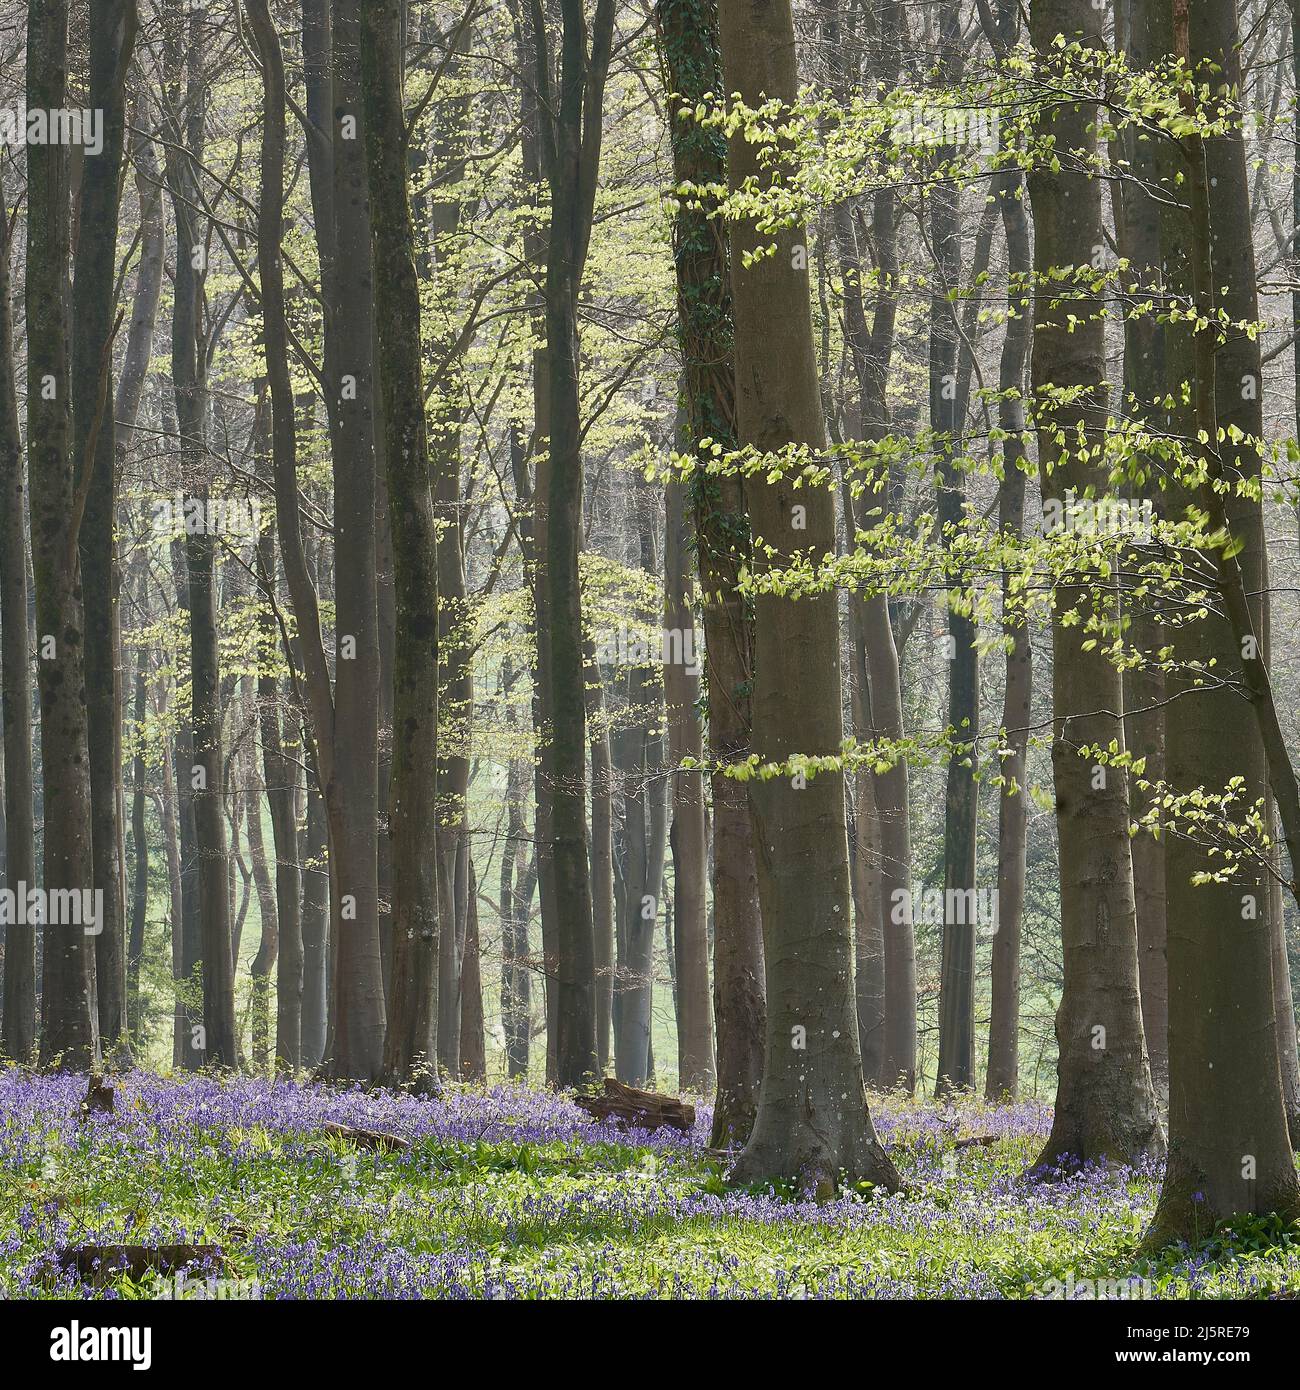 Beech woodland in spring with bluebells Stock Photo